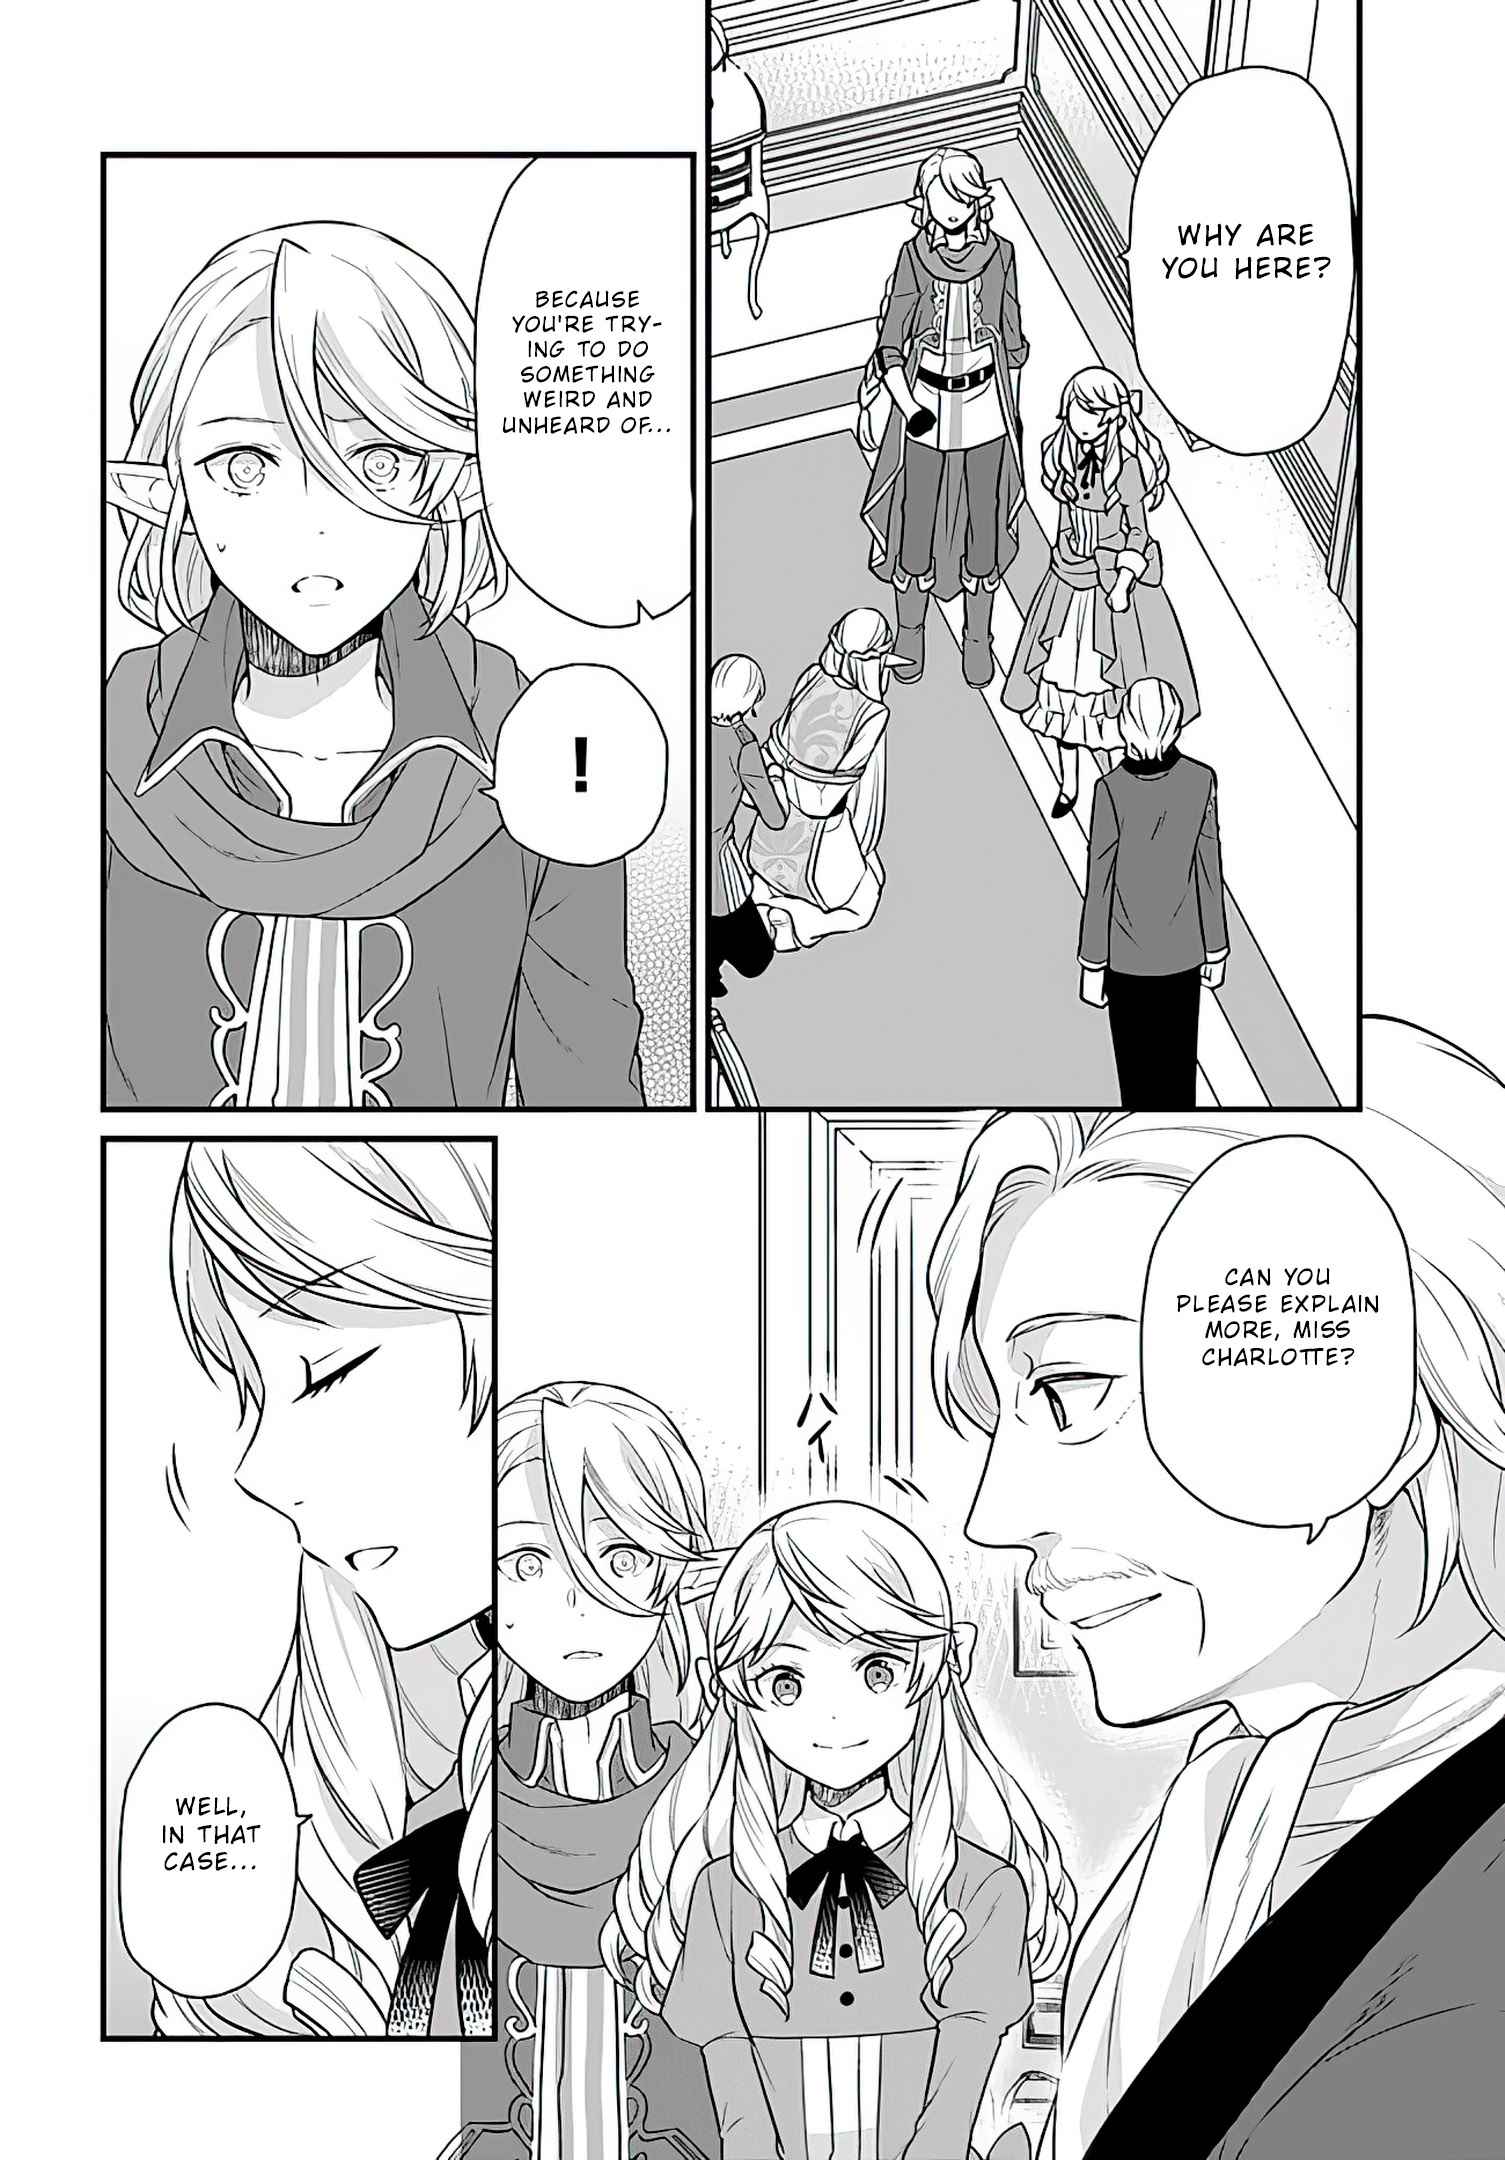 Because Of Her Love For Sake, The Otome Game Setting Was Broken And The Villainous Noblewoman Became The Noblewoman With Cheats - 13 page 3-e66199ea